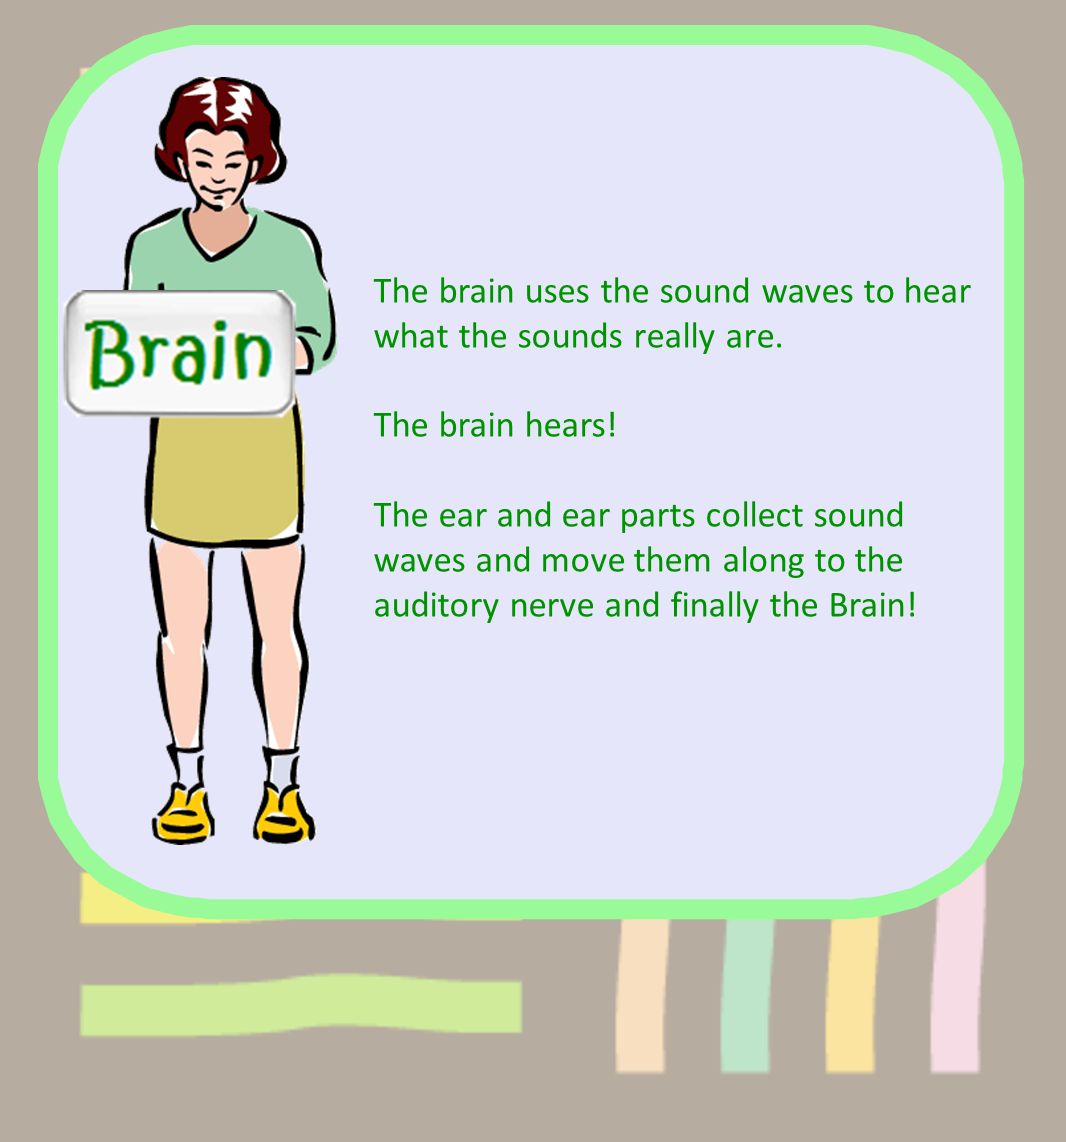 The brain uses the sound waves to hear what the sounds really are.